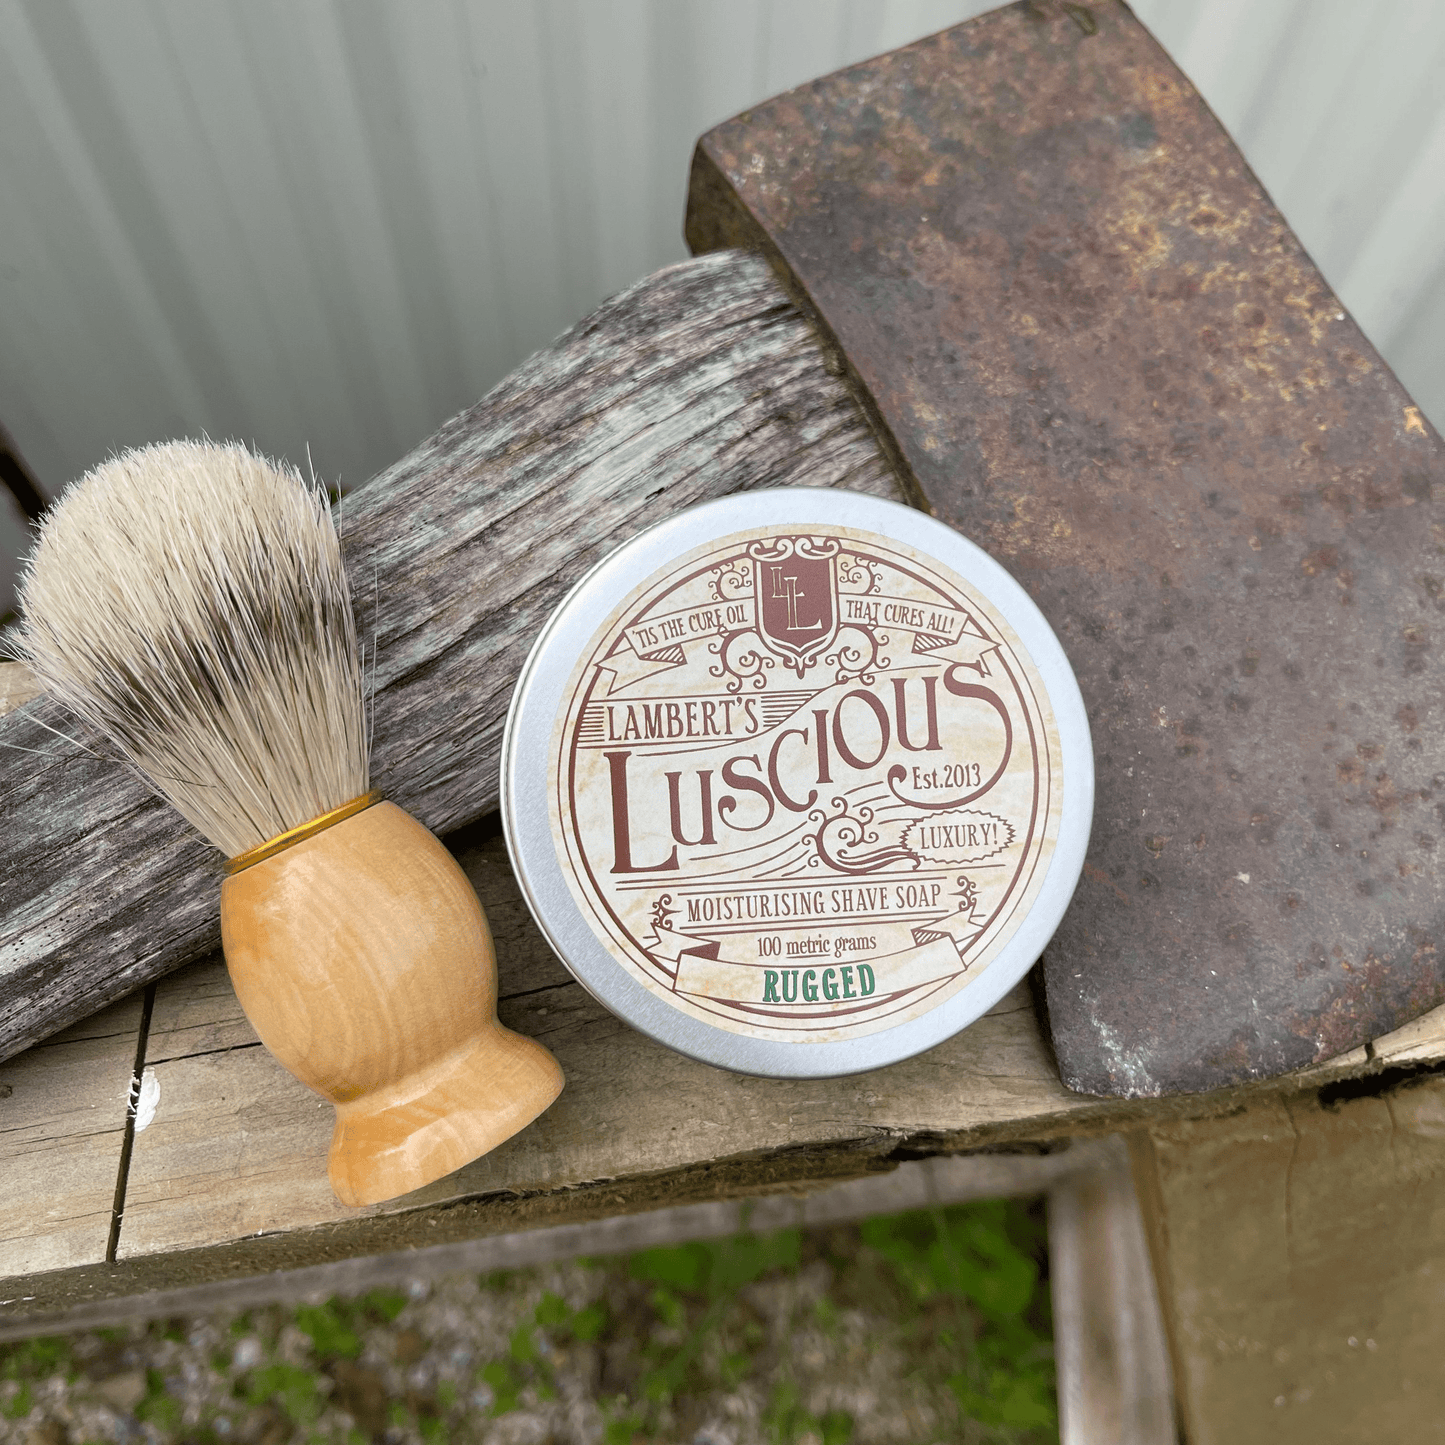 Metal tin of Lamberts Luscious mens shaving soap and a boar bristle shaving brush sitting next to an axe.